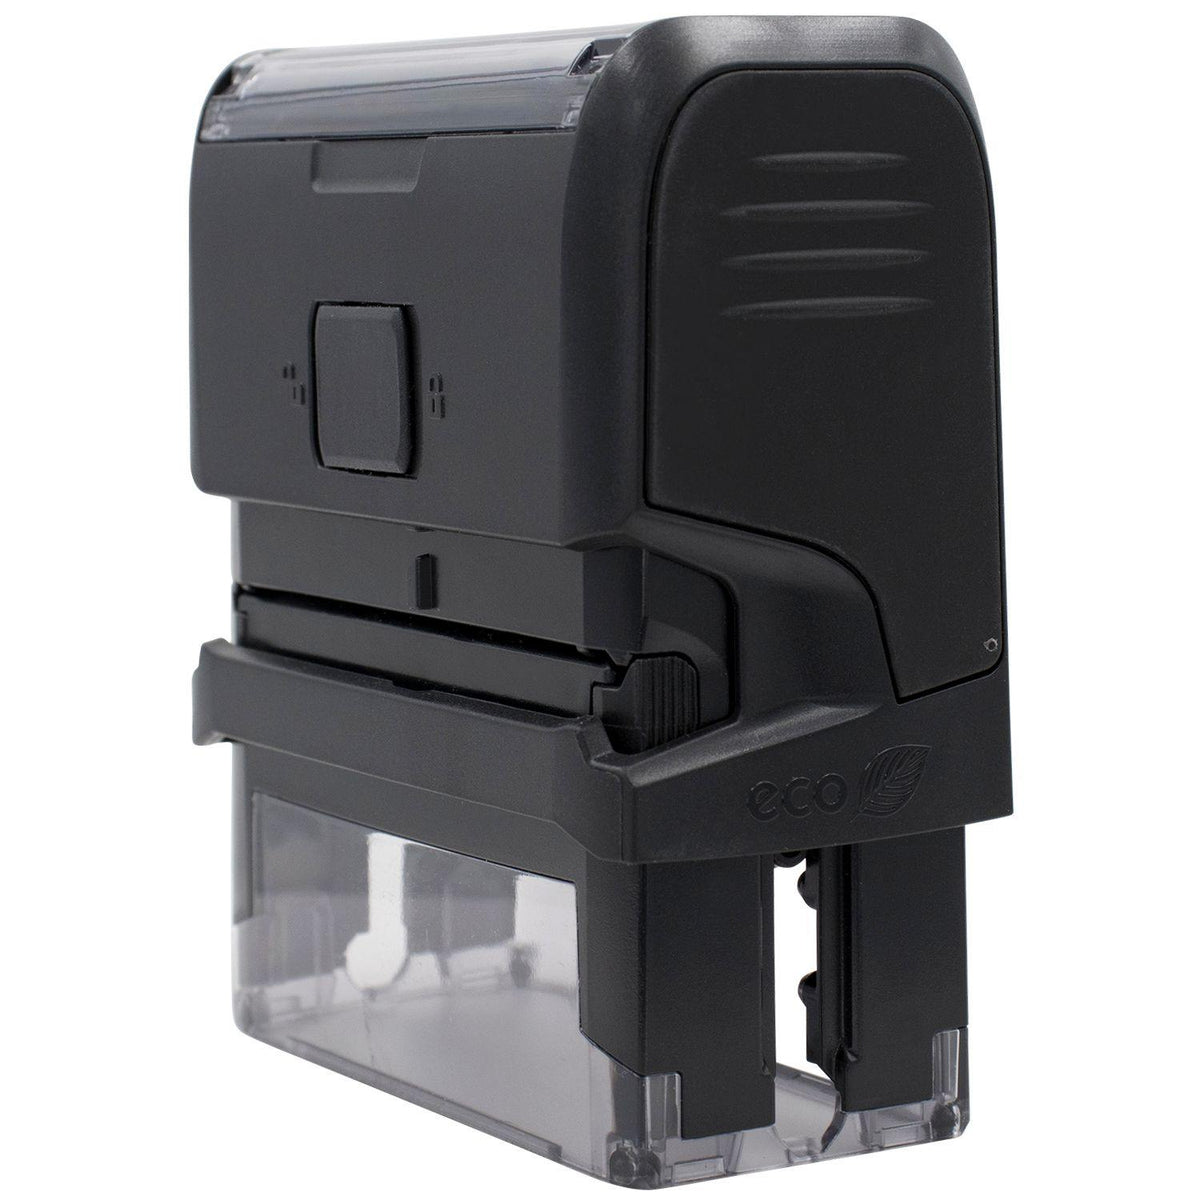 Large Self Inking Witness Stamp - Engineer Seal Stamps - Brand_Trodat, Impression Size_Large, Stamp Type_Self-Inking Stamp, Type of Use_Legal